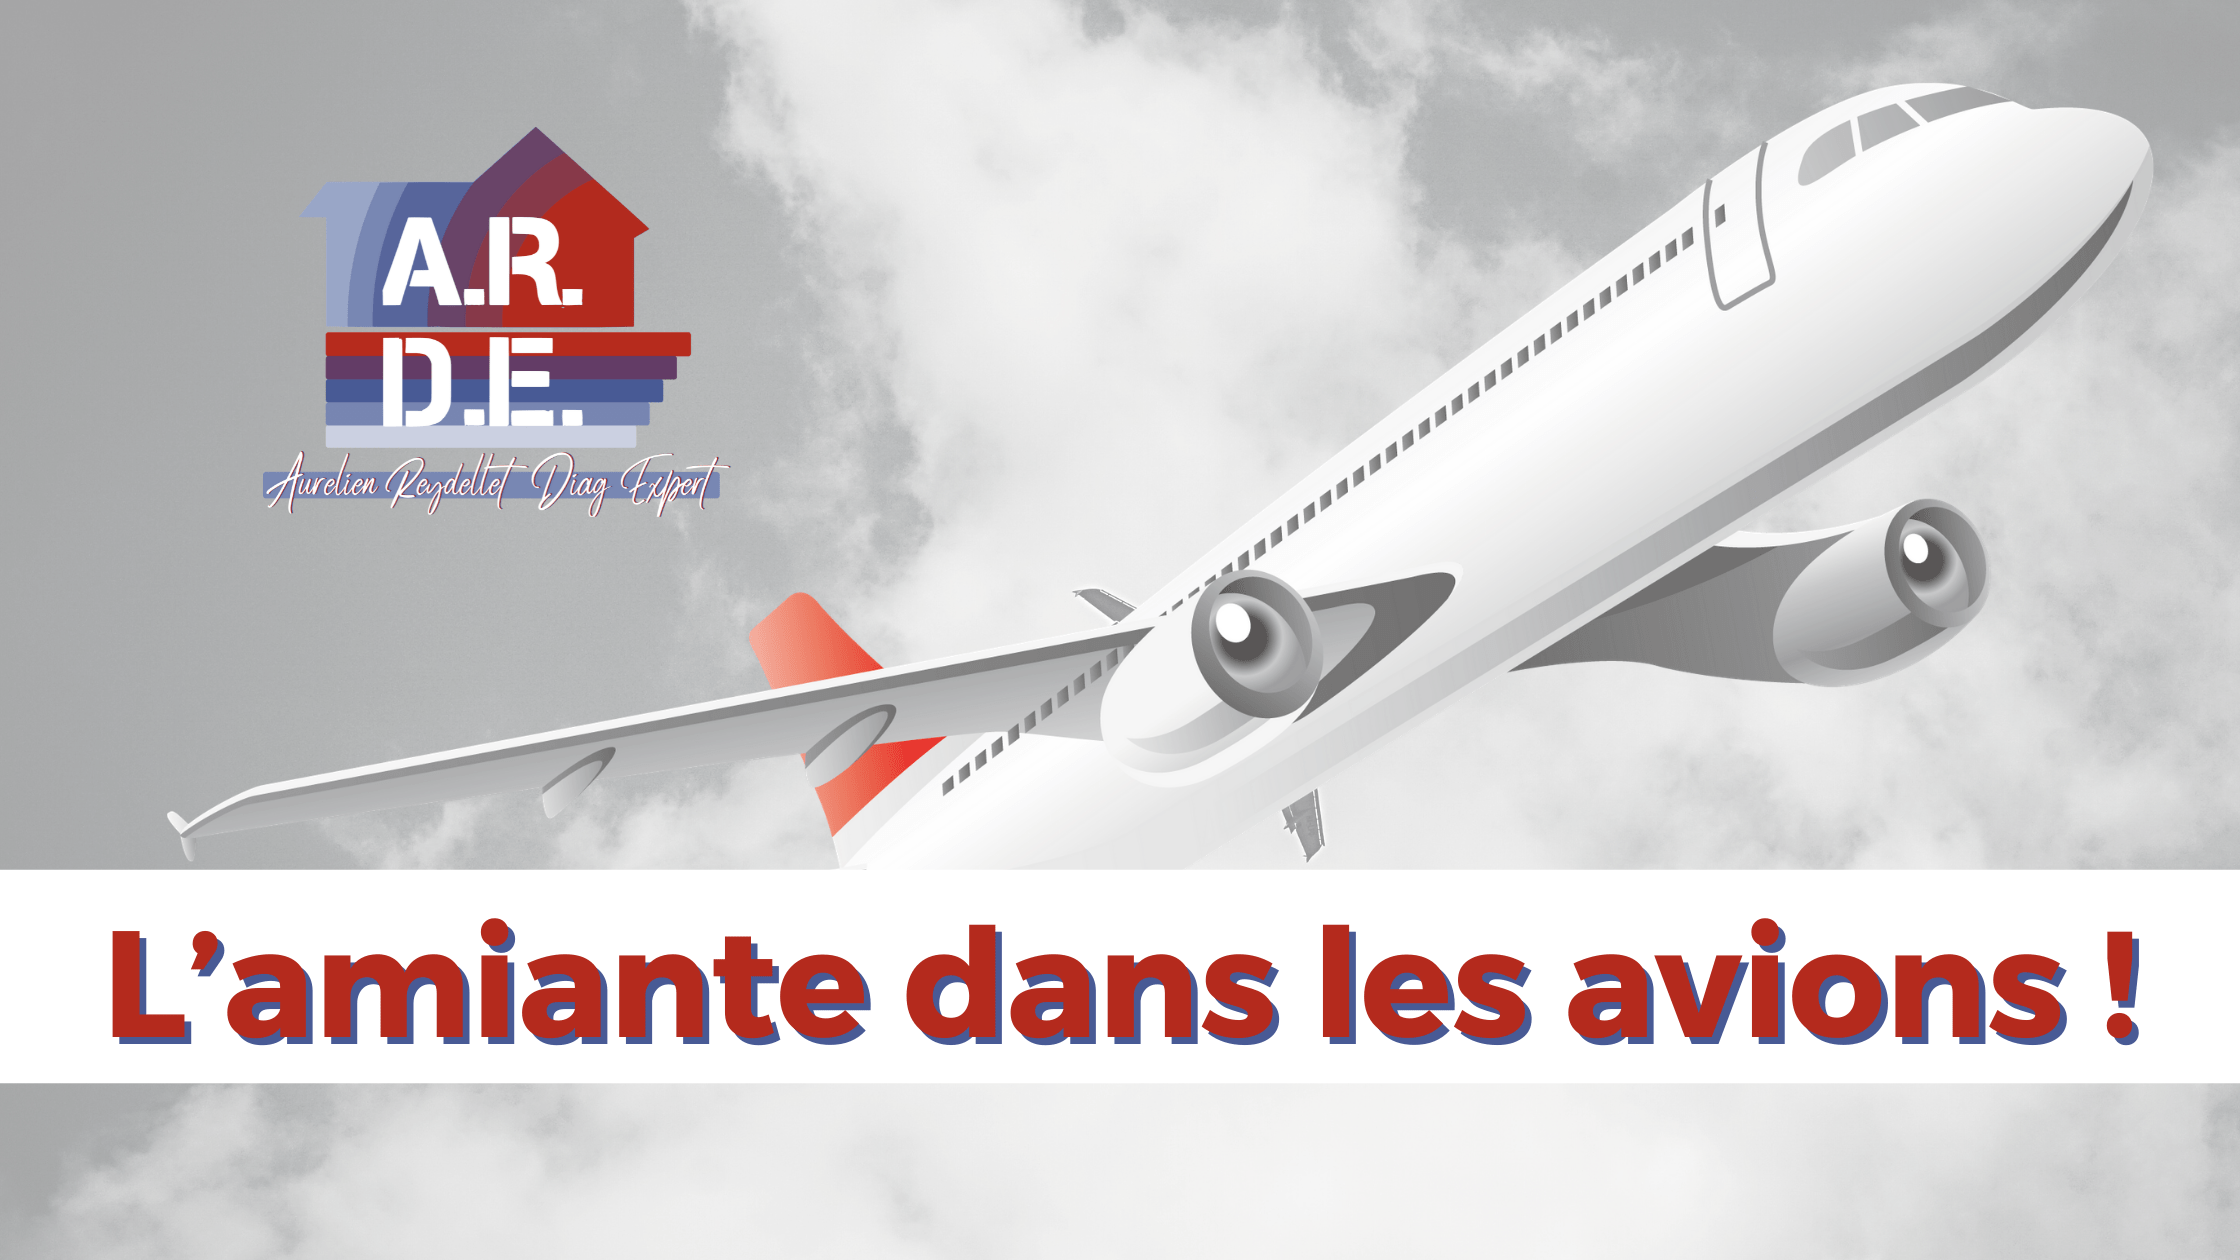 You are currently viewing L’amiante dans les avions !